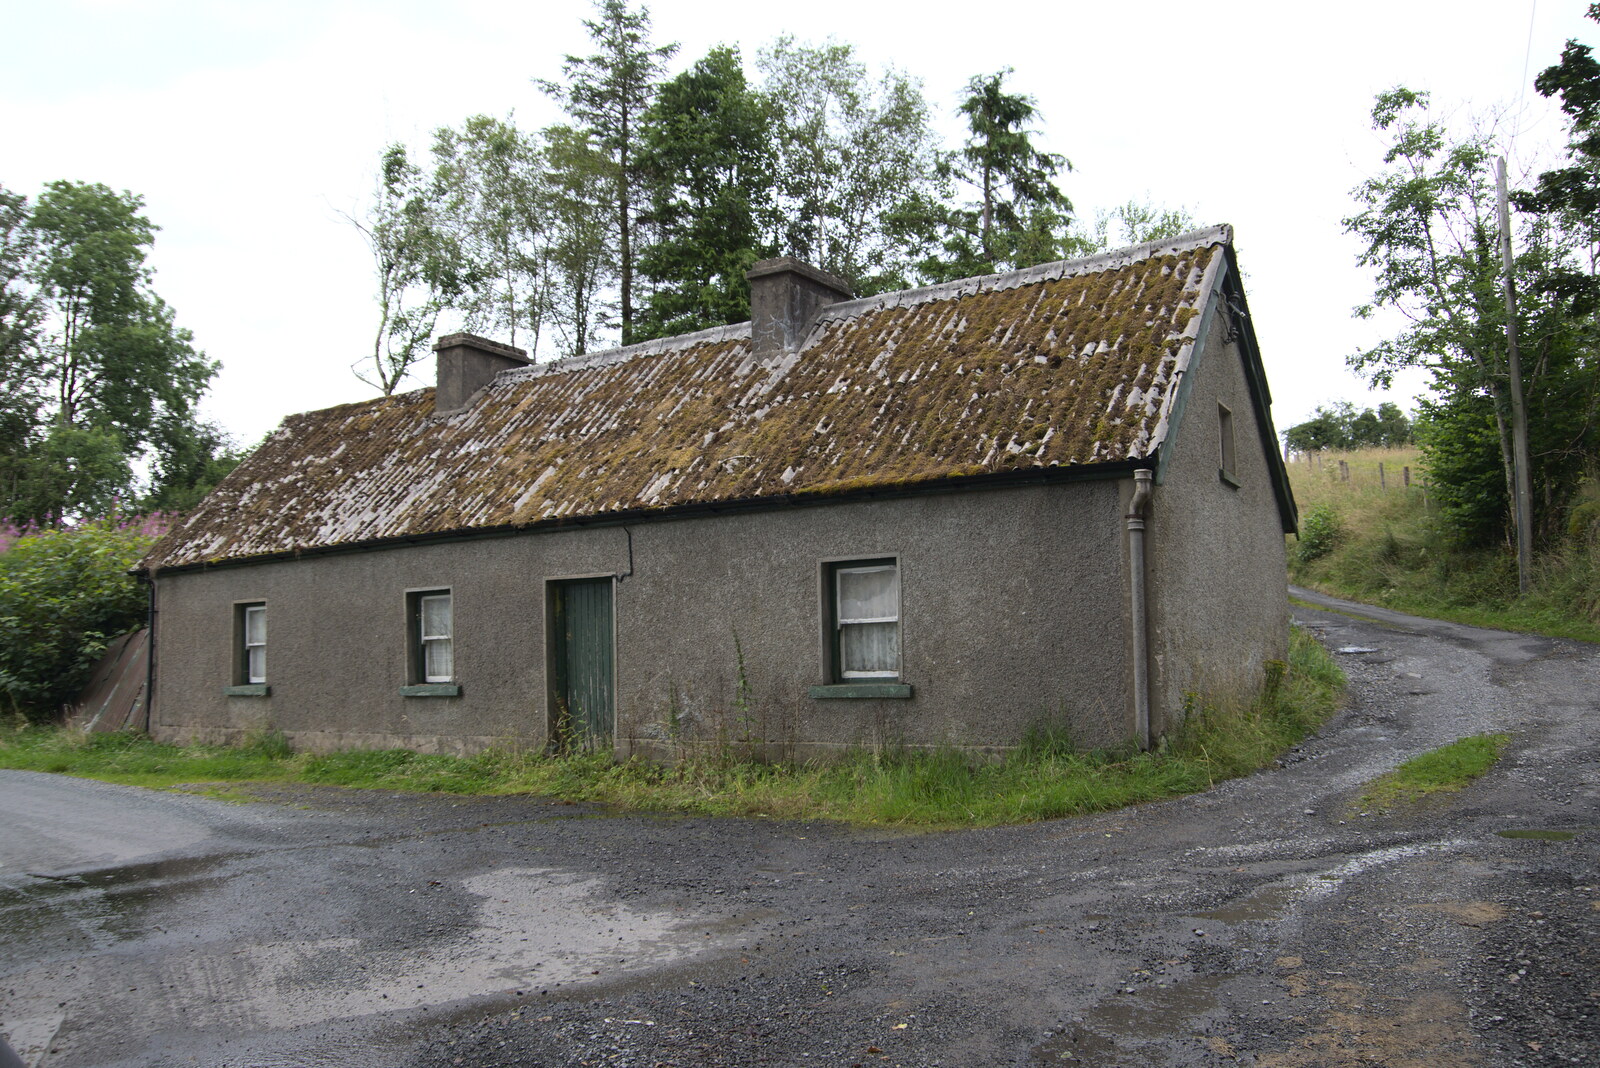 A Trip to Manorhamilton, County Leitrim, Ireland - 11th August 2021: A derelict cottage on the way to Philly's house